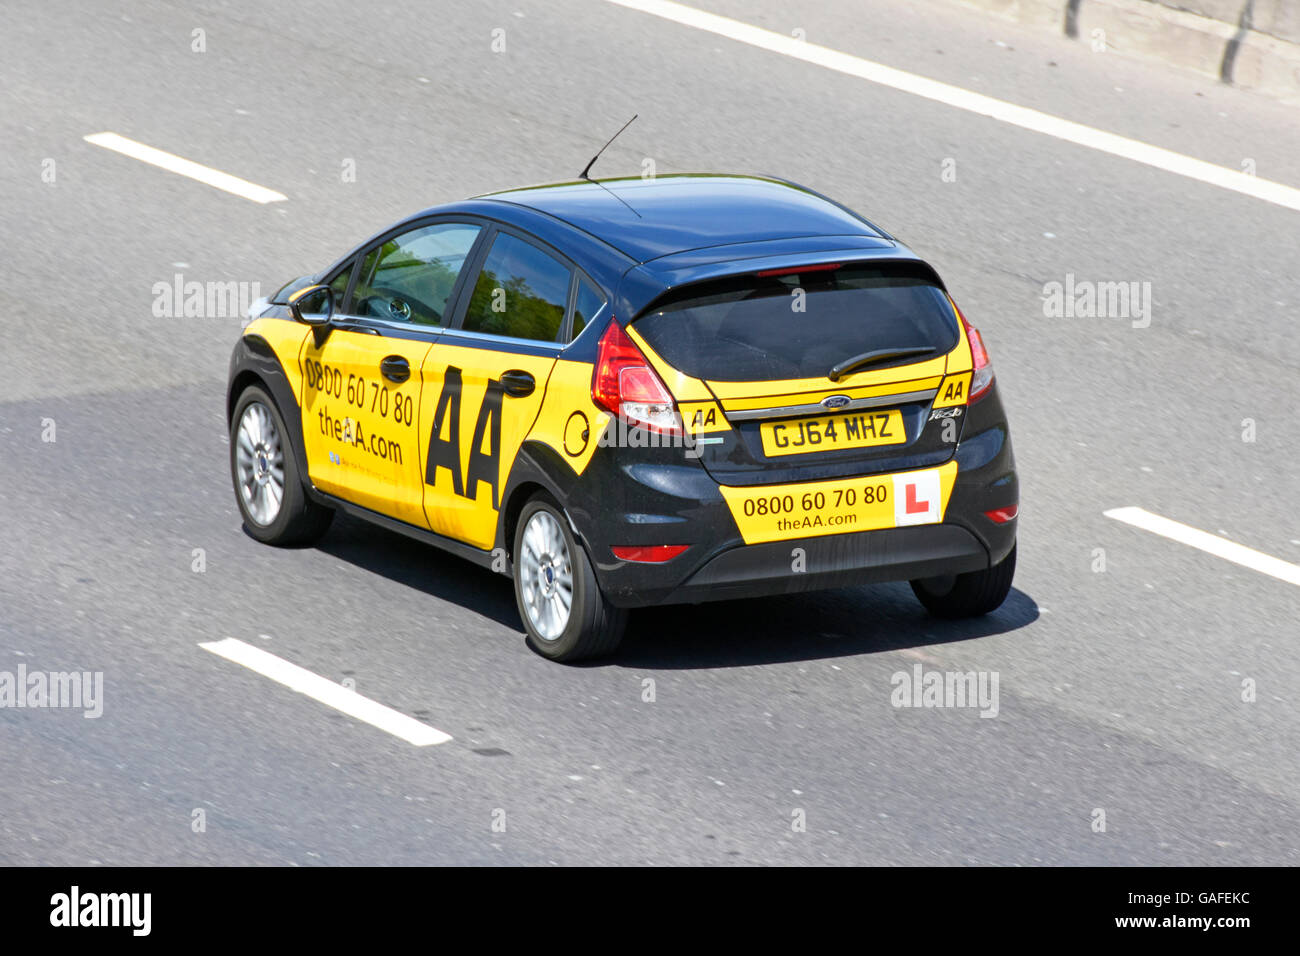 AA driving school Ford Fiesta instruction car with L plate driving along M25 English motorway Essex England UK Stock Photo